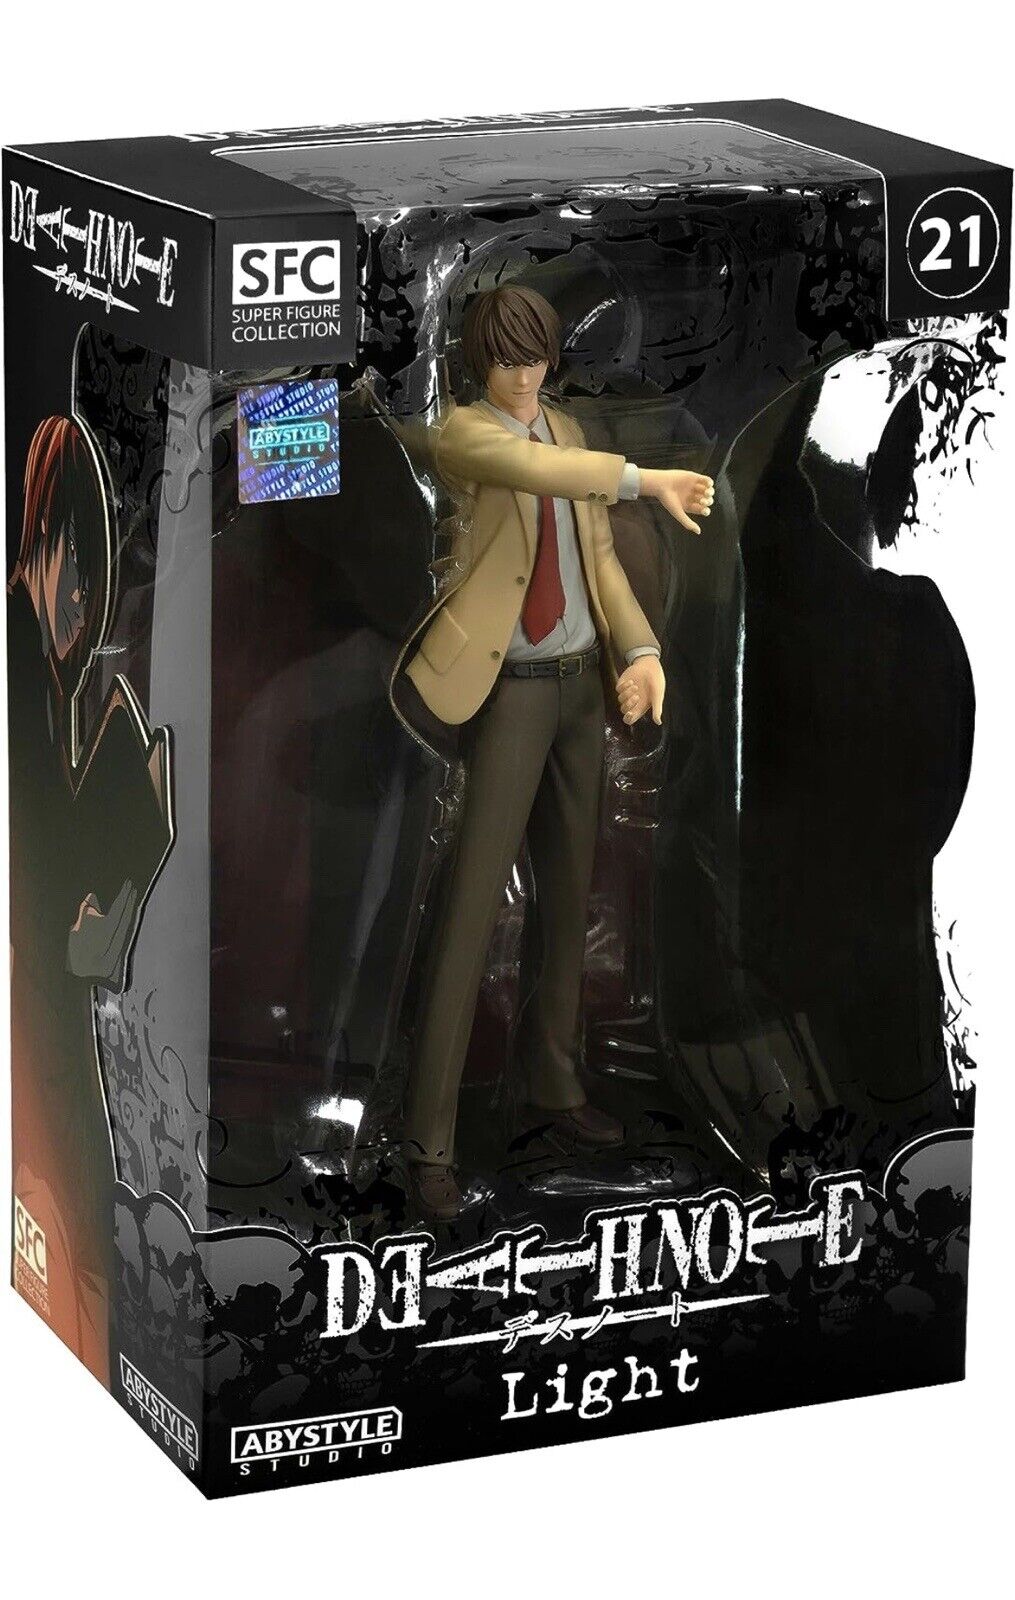 ABYstyle Studio Death Note Light SFC Collectible PVC Figure Statue